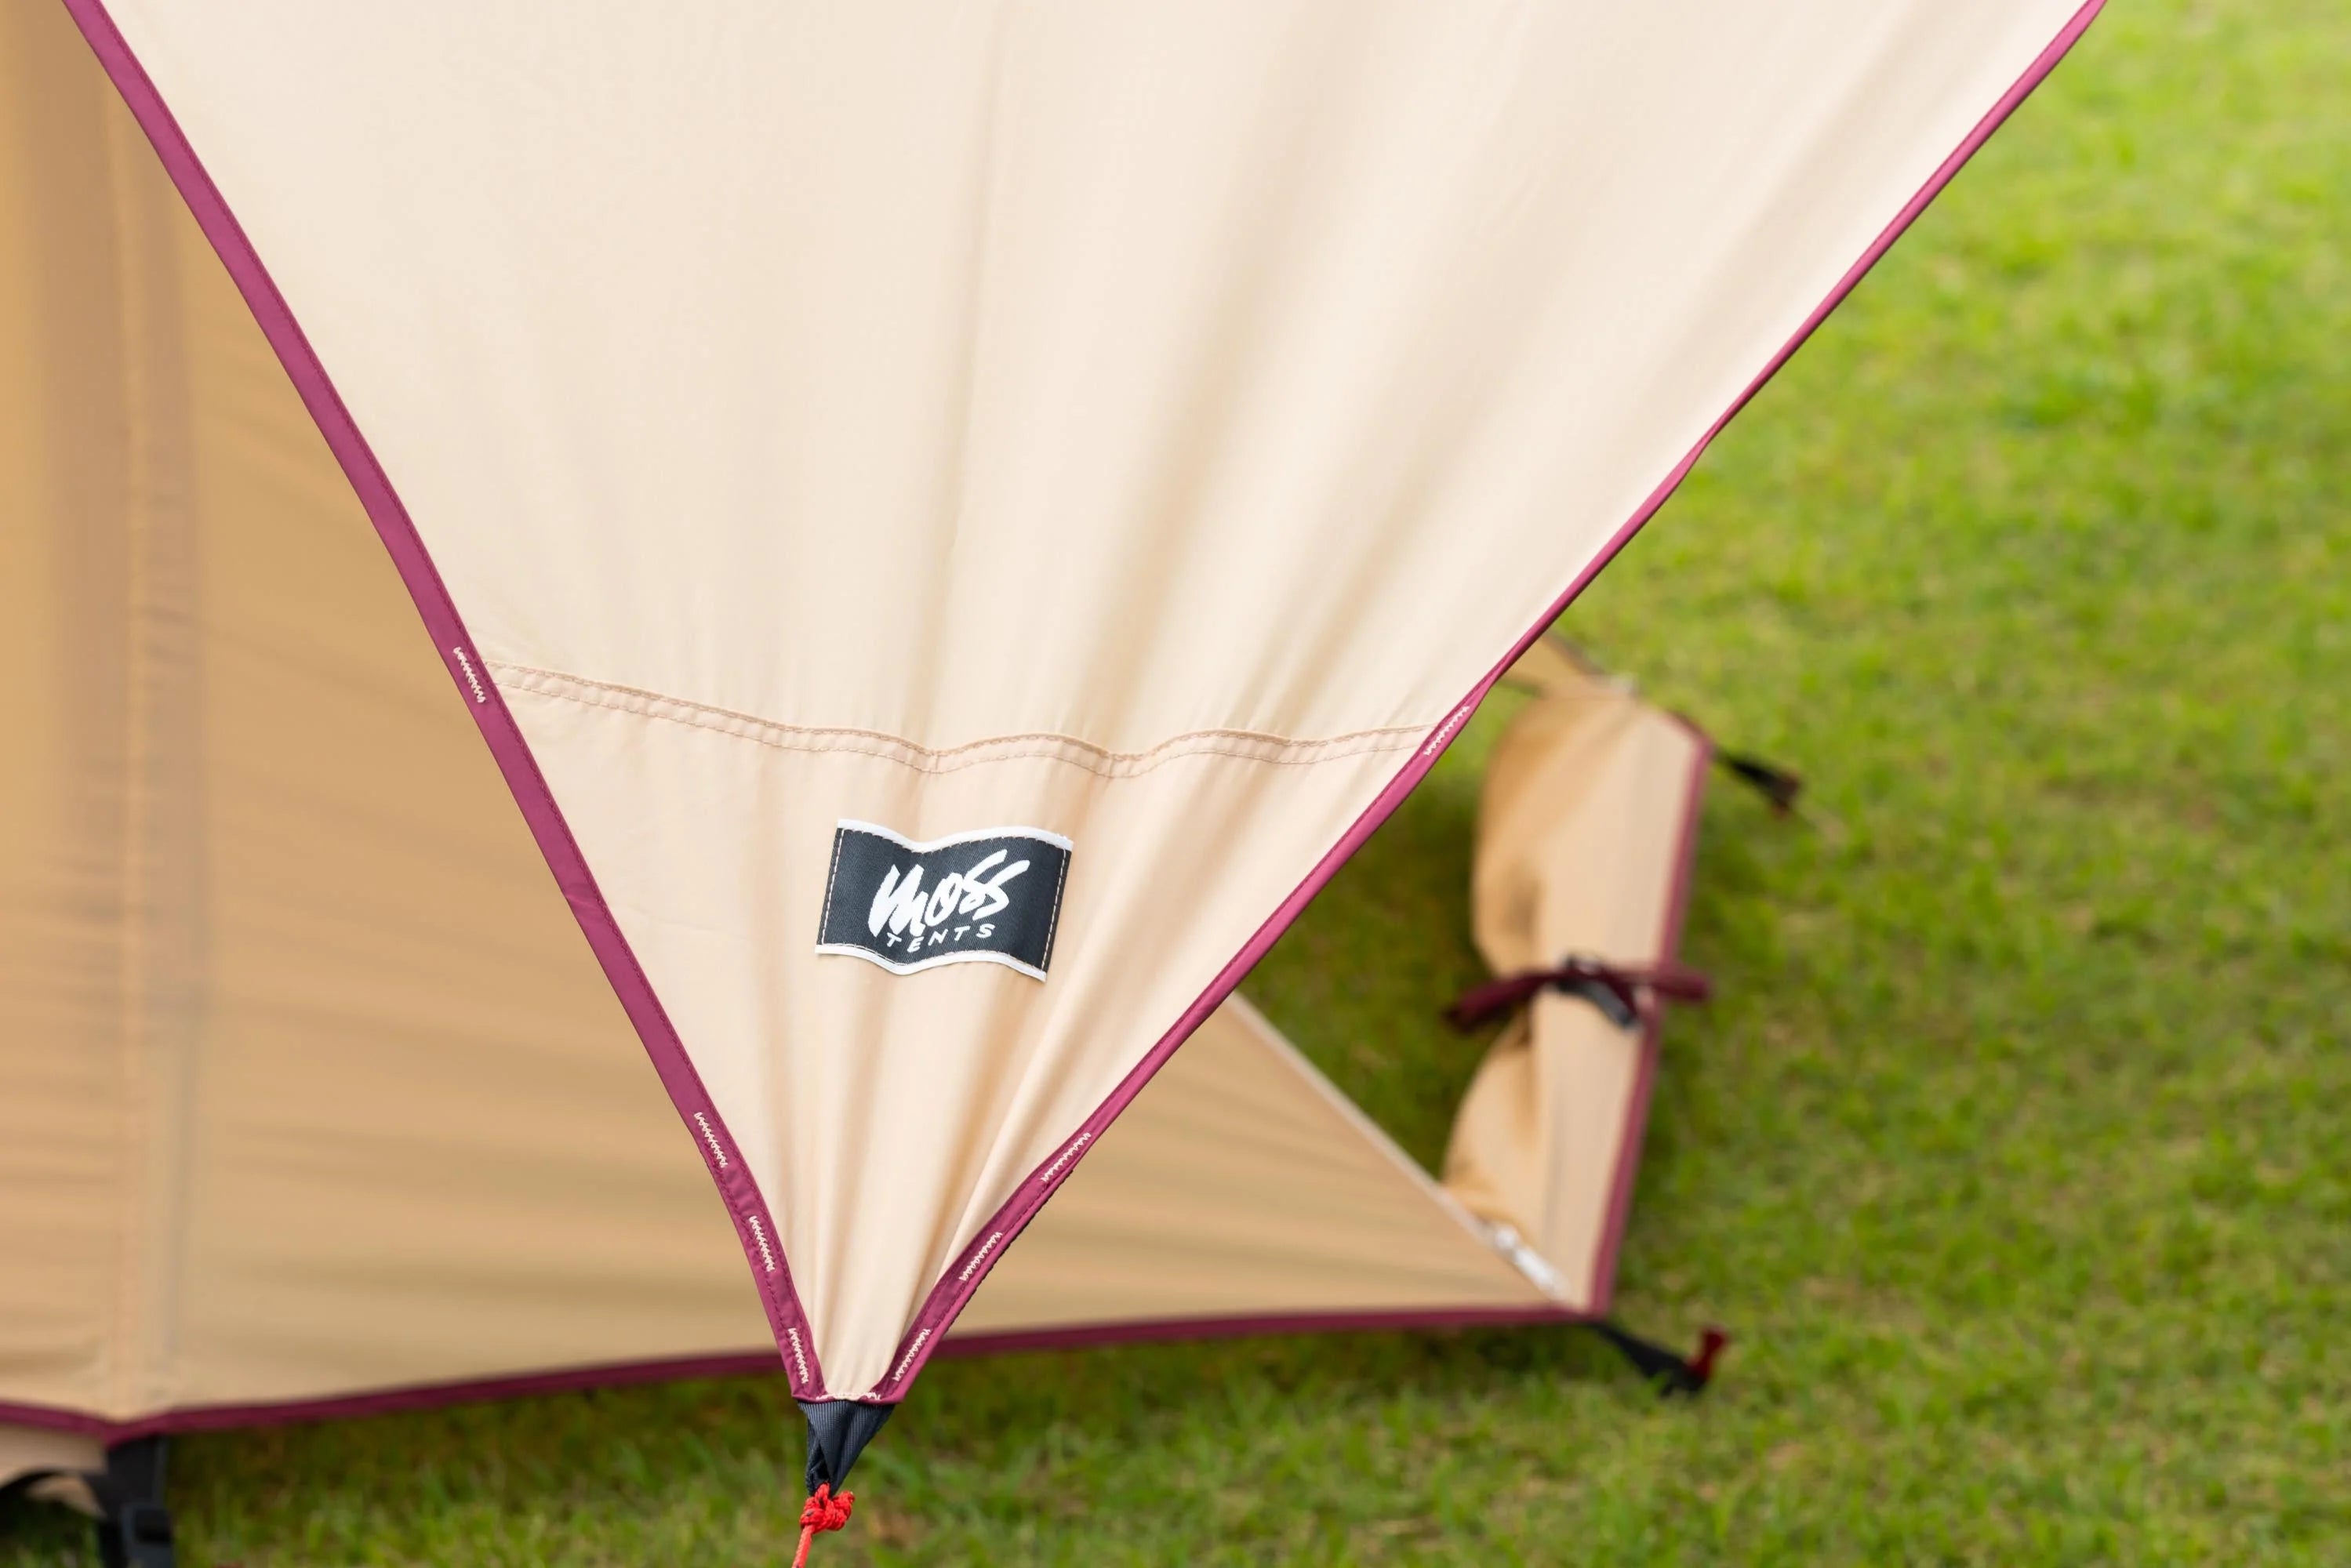 PARAWING 19ft – MOSS®TENTS ONLINE